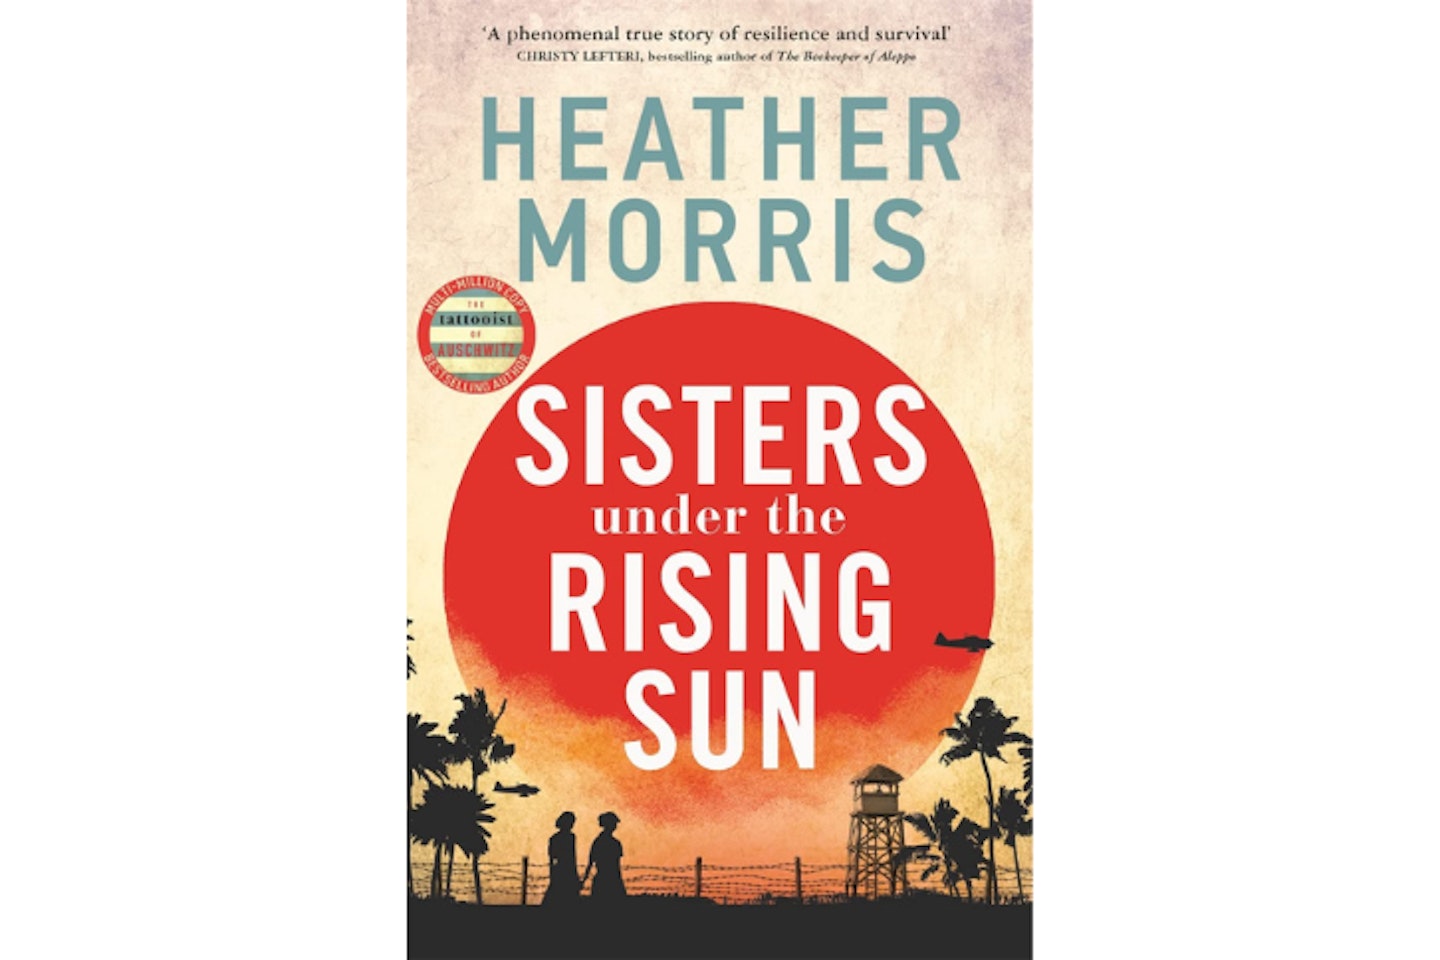 Sisters under the Rising Sun by Heather Morris